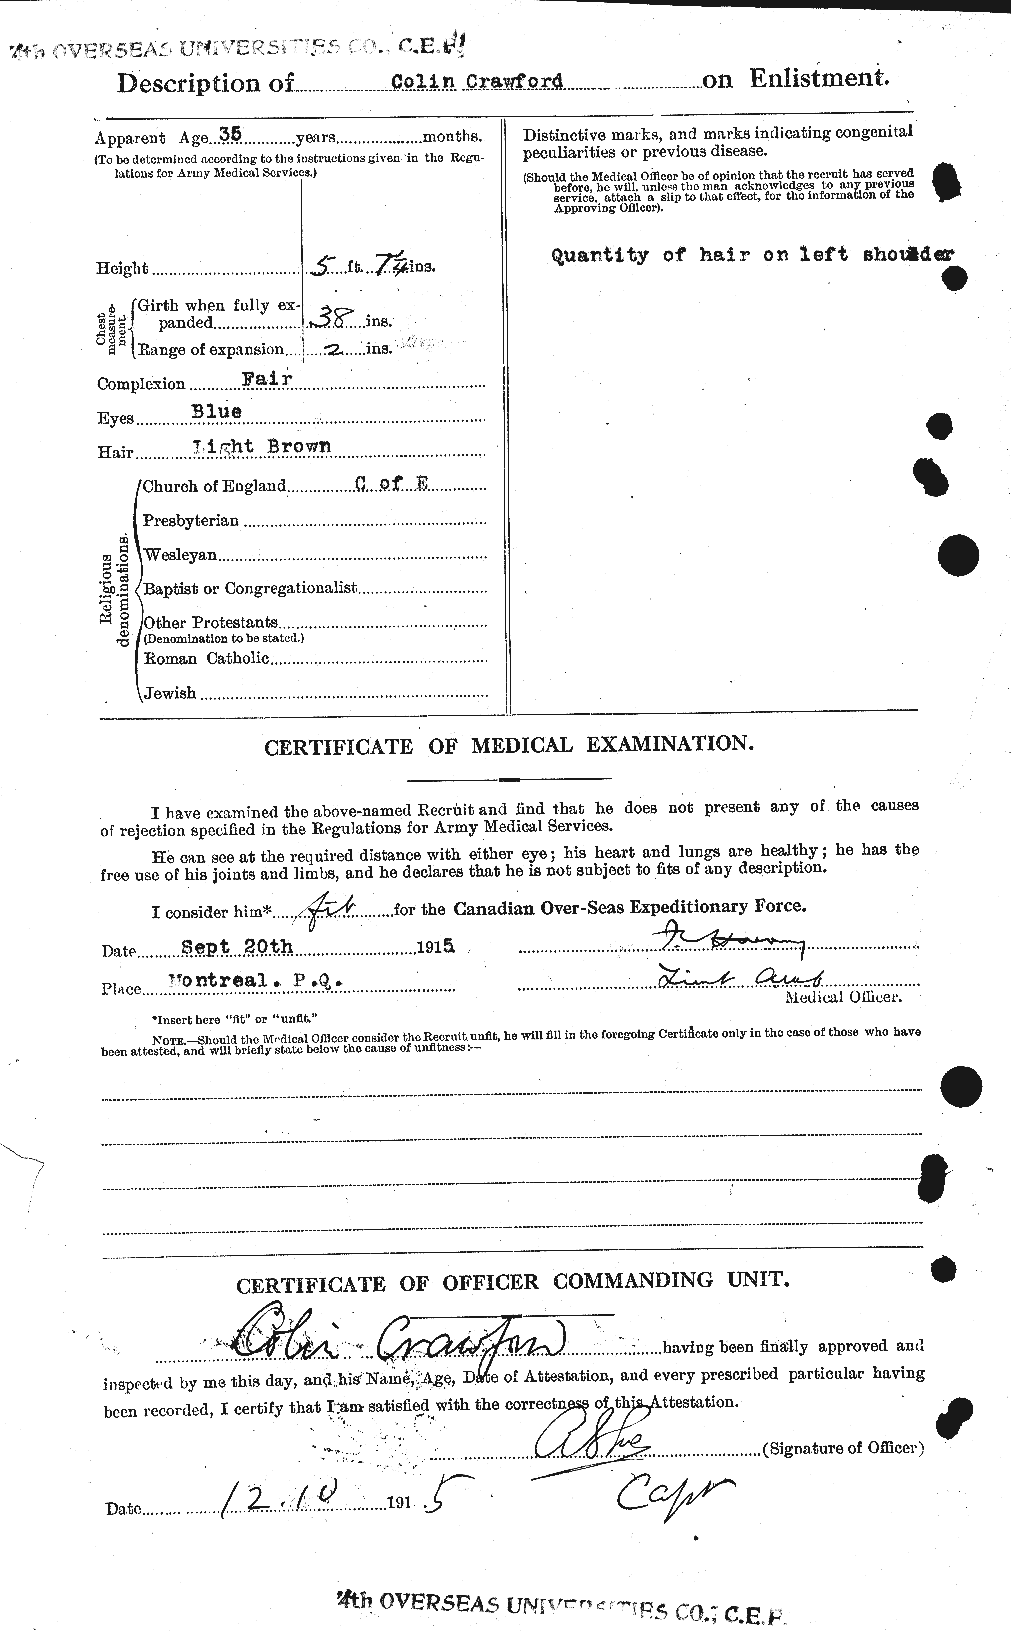 Personnel Records of the First World War - CEF 060826b